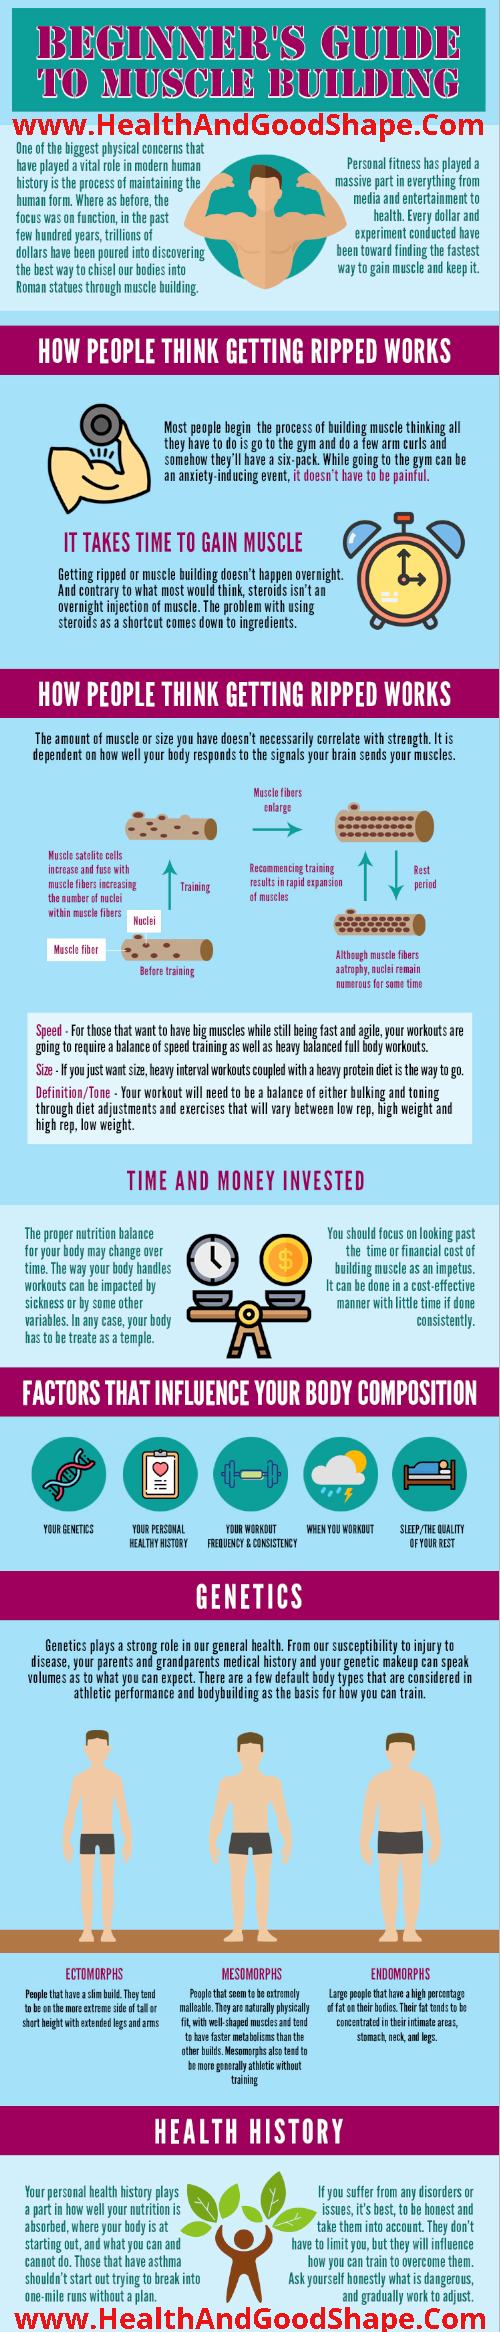 Muscle Building_2 infographic